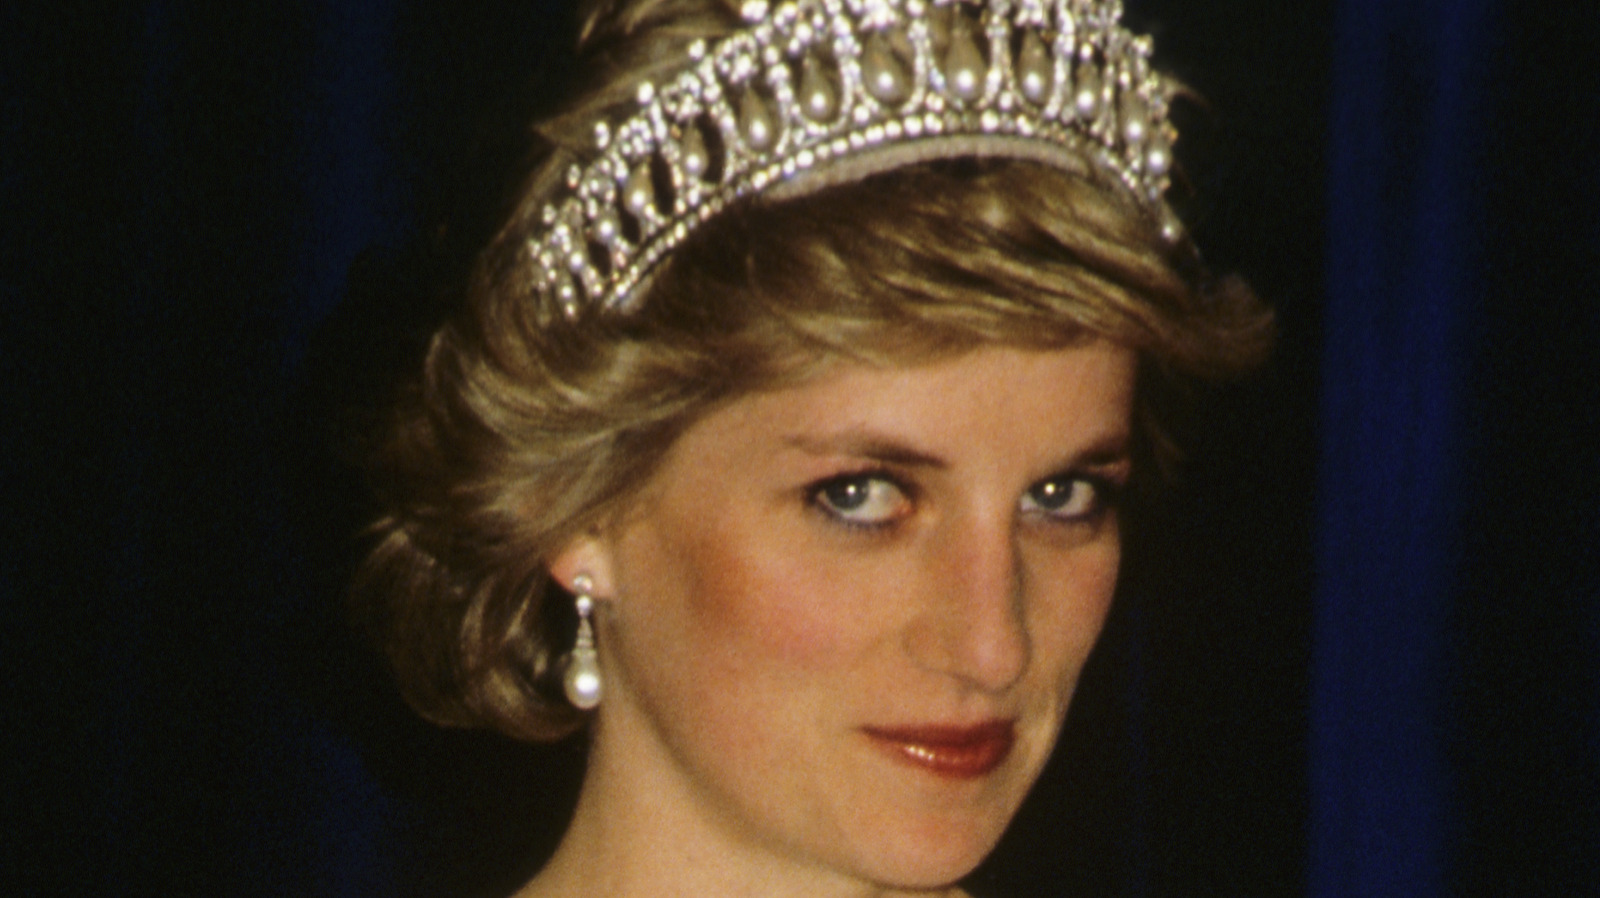 The Scandalous History Of Princess Diana's Family, The Spencers